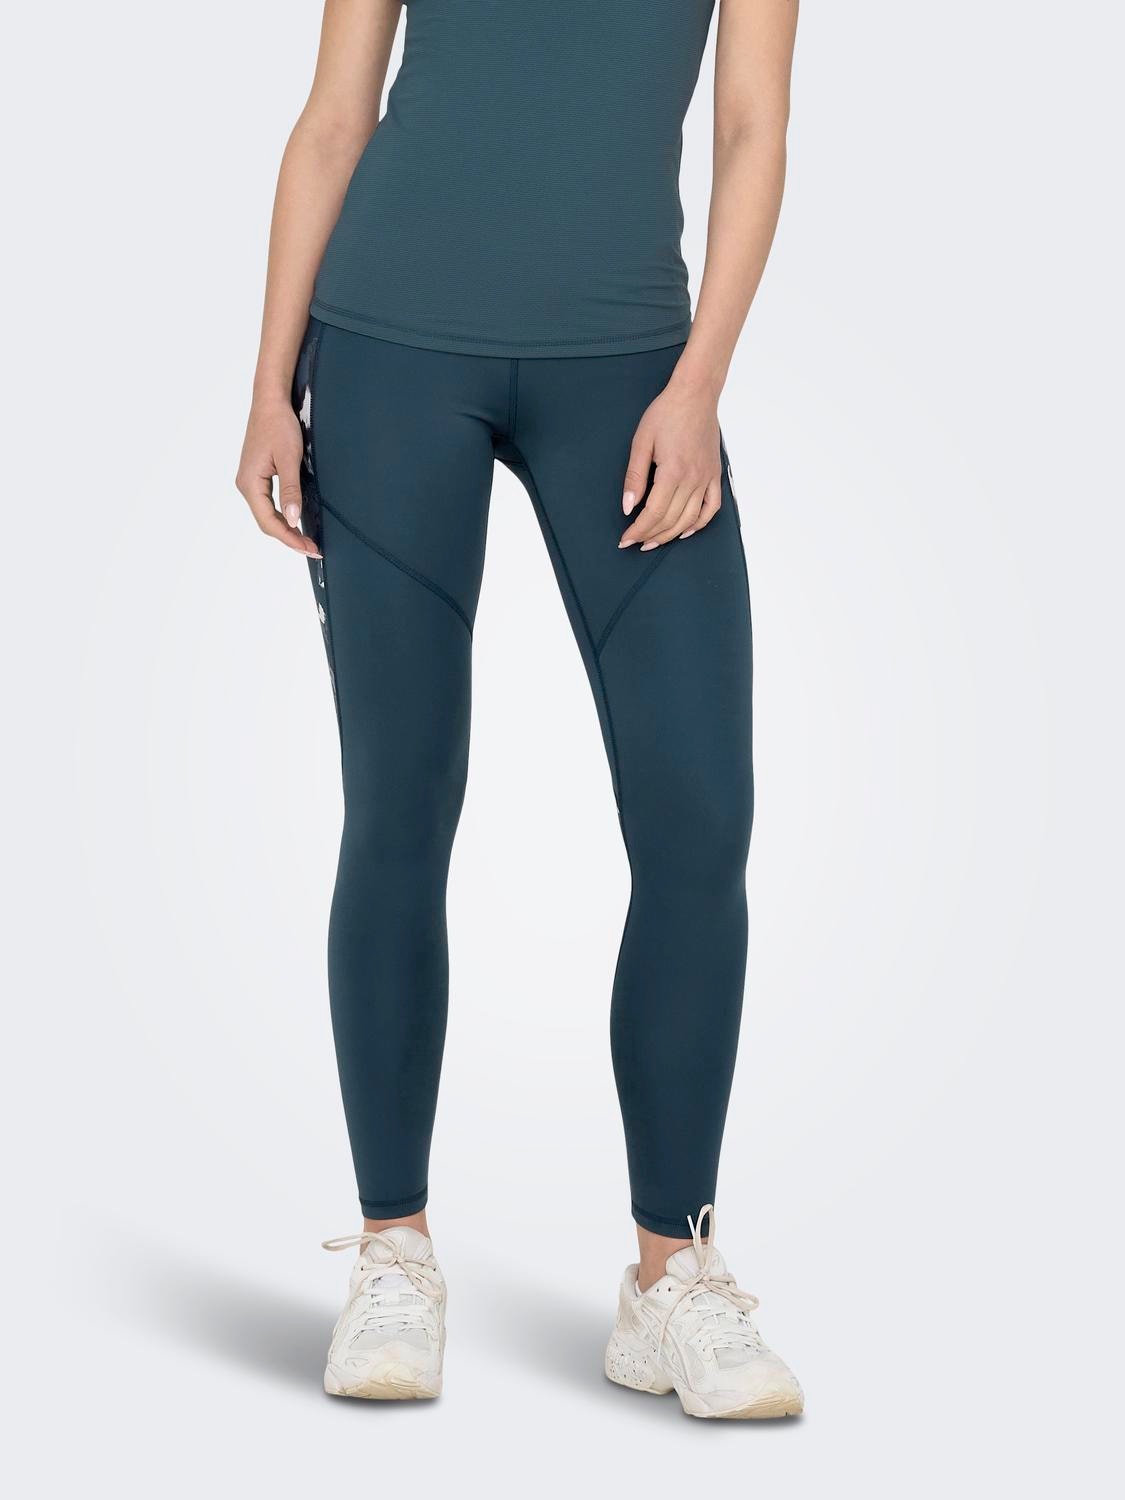 ONLY Tight Fit High waist Leggings -Orion Blue - 15294994